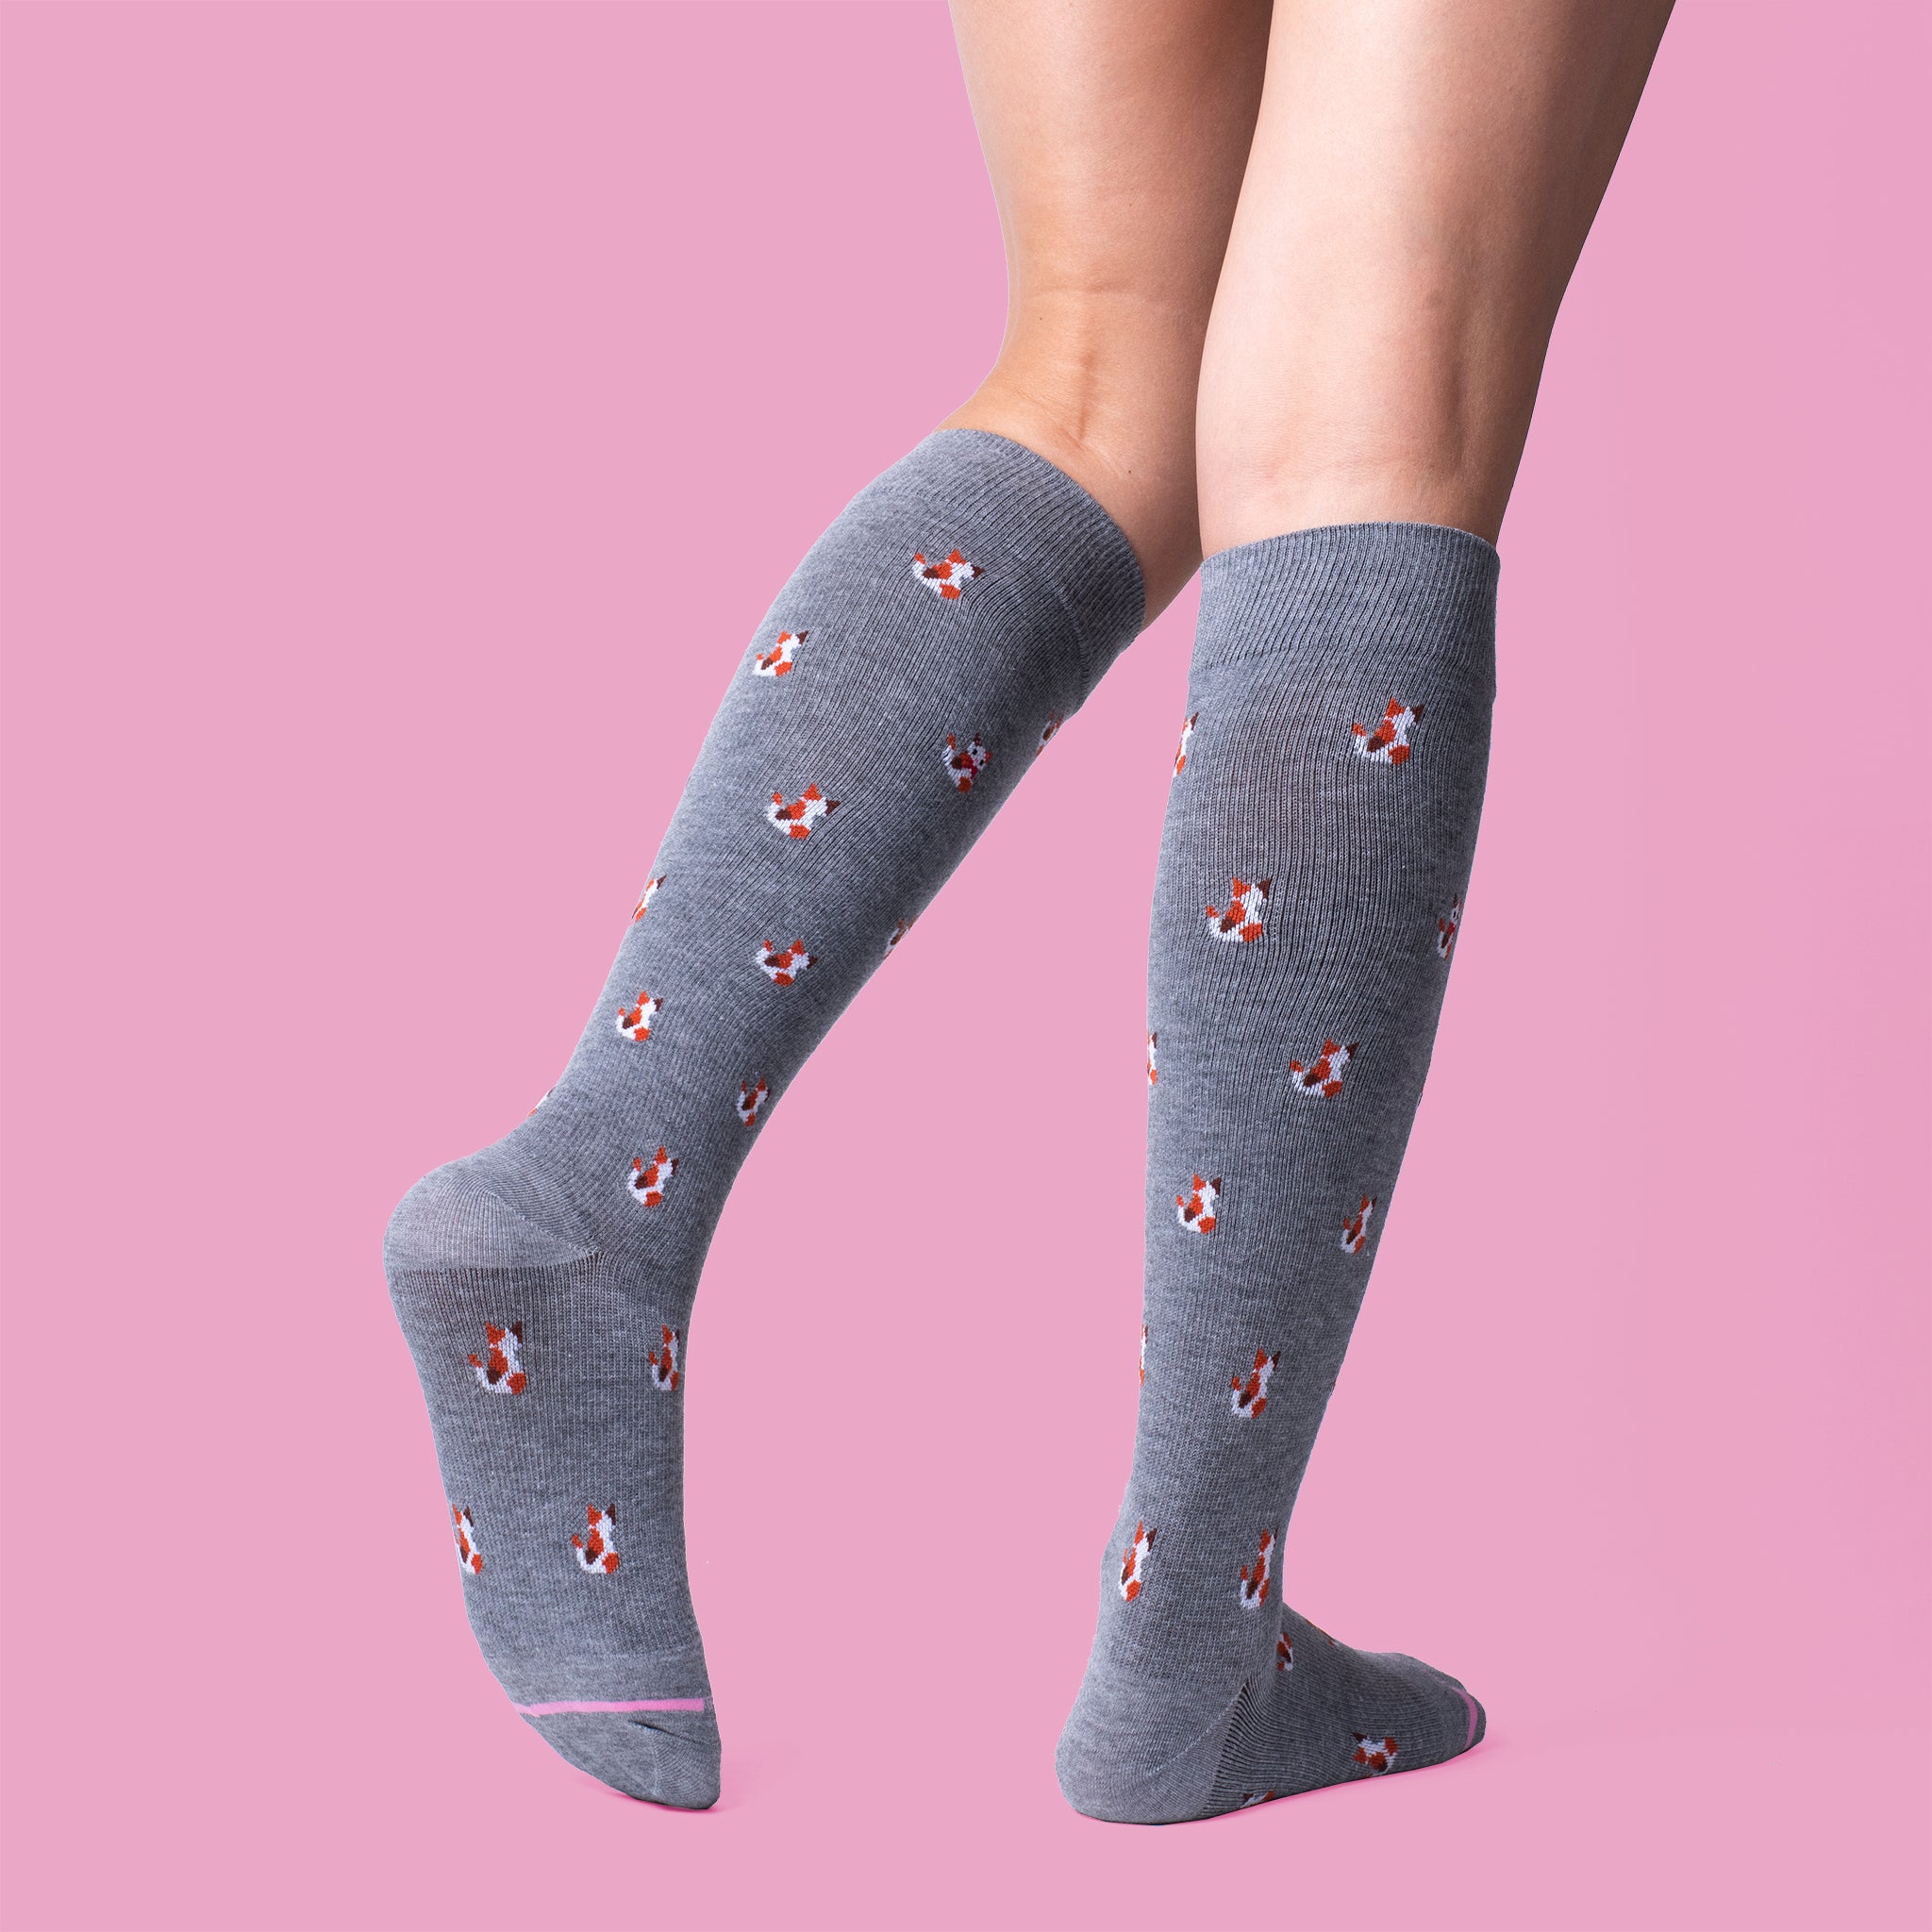 Cats | Knee-High Compression Socks For Women